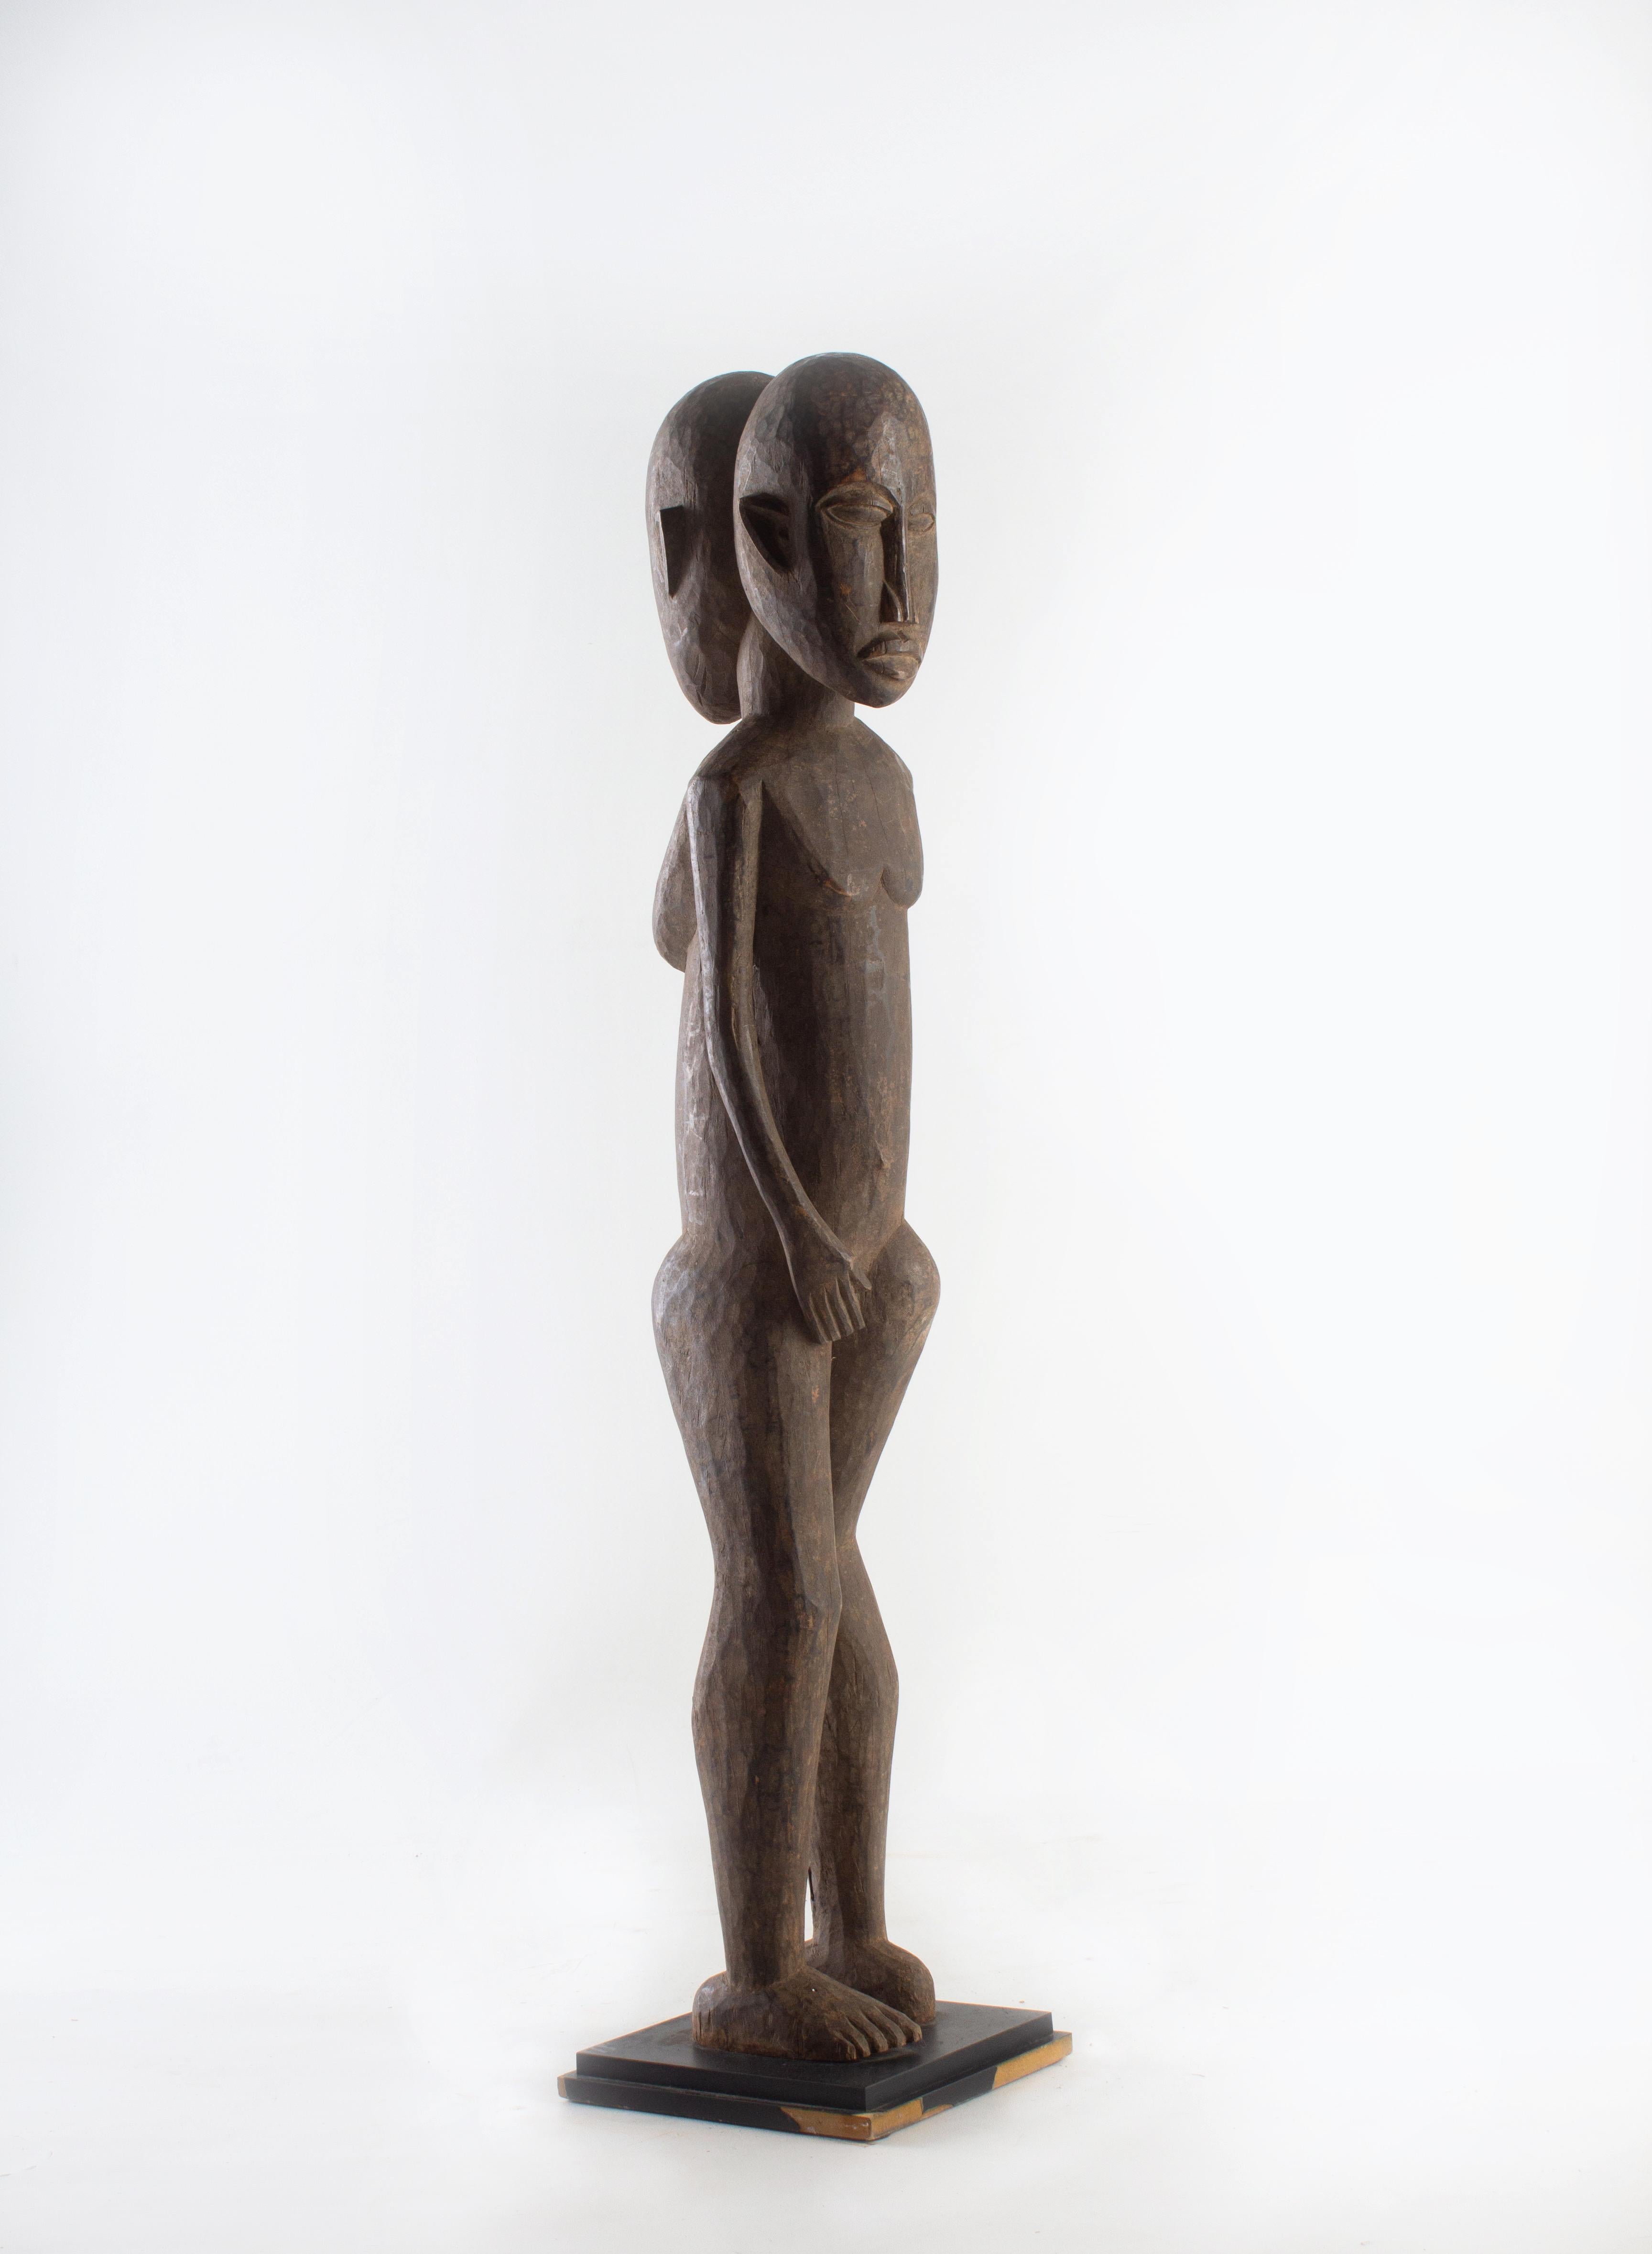 Vintage Congolese fertility wood carved icon. In my organic, contemporary, vintage and mid-century modern aesthetic.